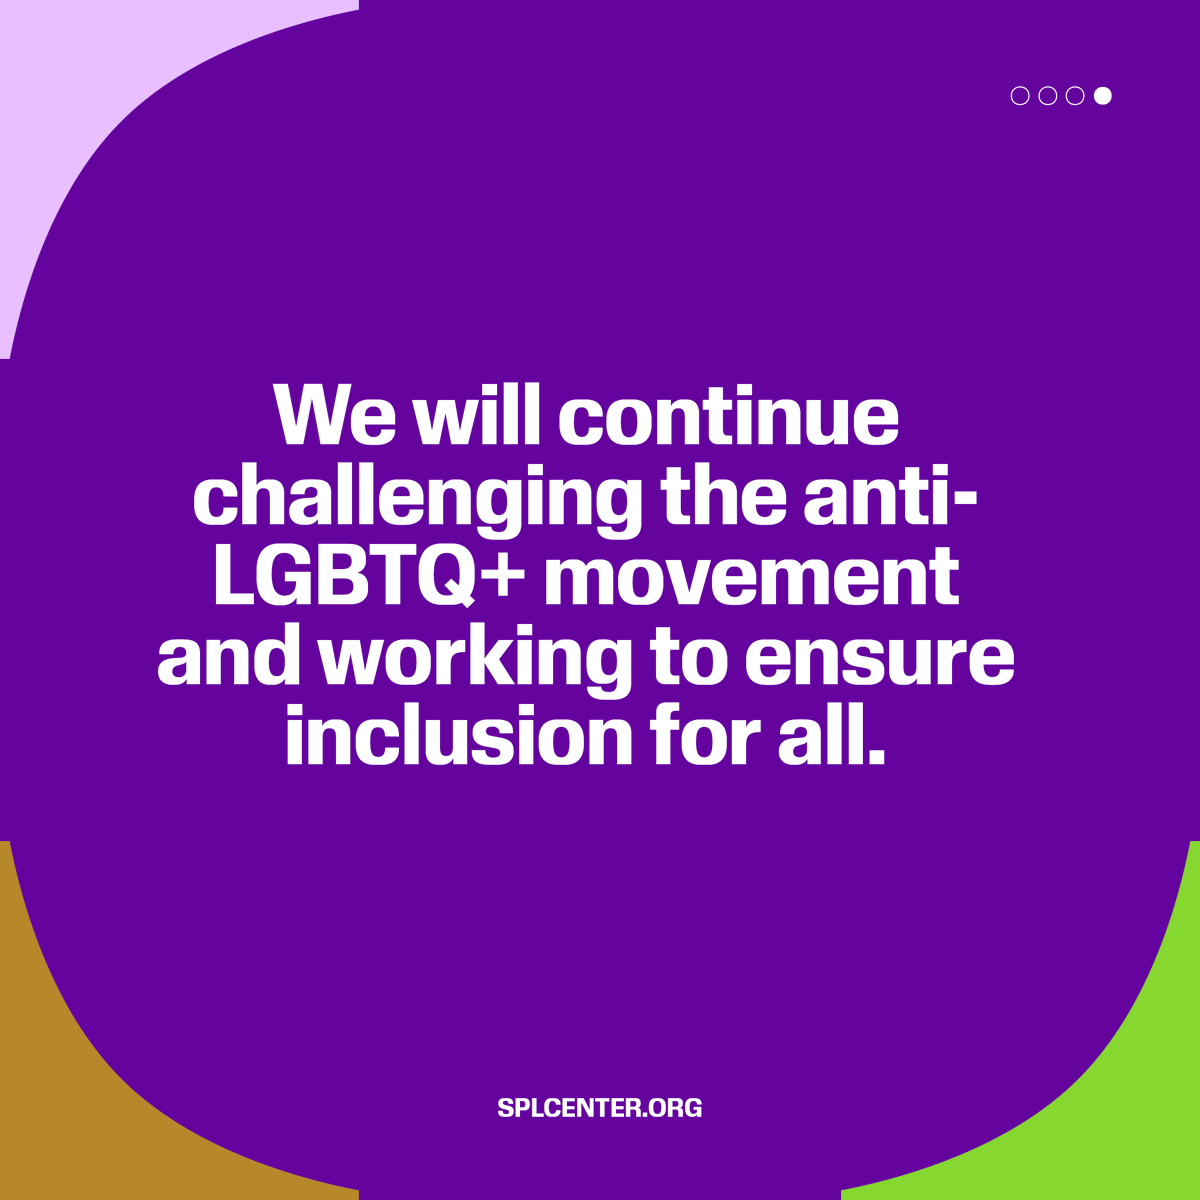 🎉 Huge win! We stopped ALL anti-LGBTQ+ bills in Georgia's 2024 session. Despite underhanded tactics being employed by anti-LGBTQ+ groups, the SPLC stands firm in our dedication to LGBTQ+ rights. #LGBTQRights #YallMeansAll